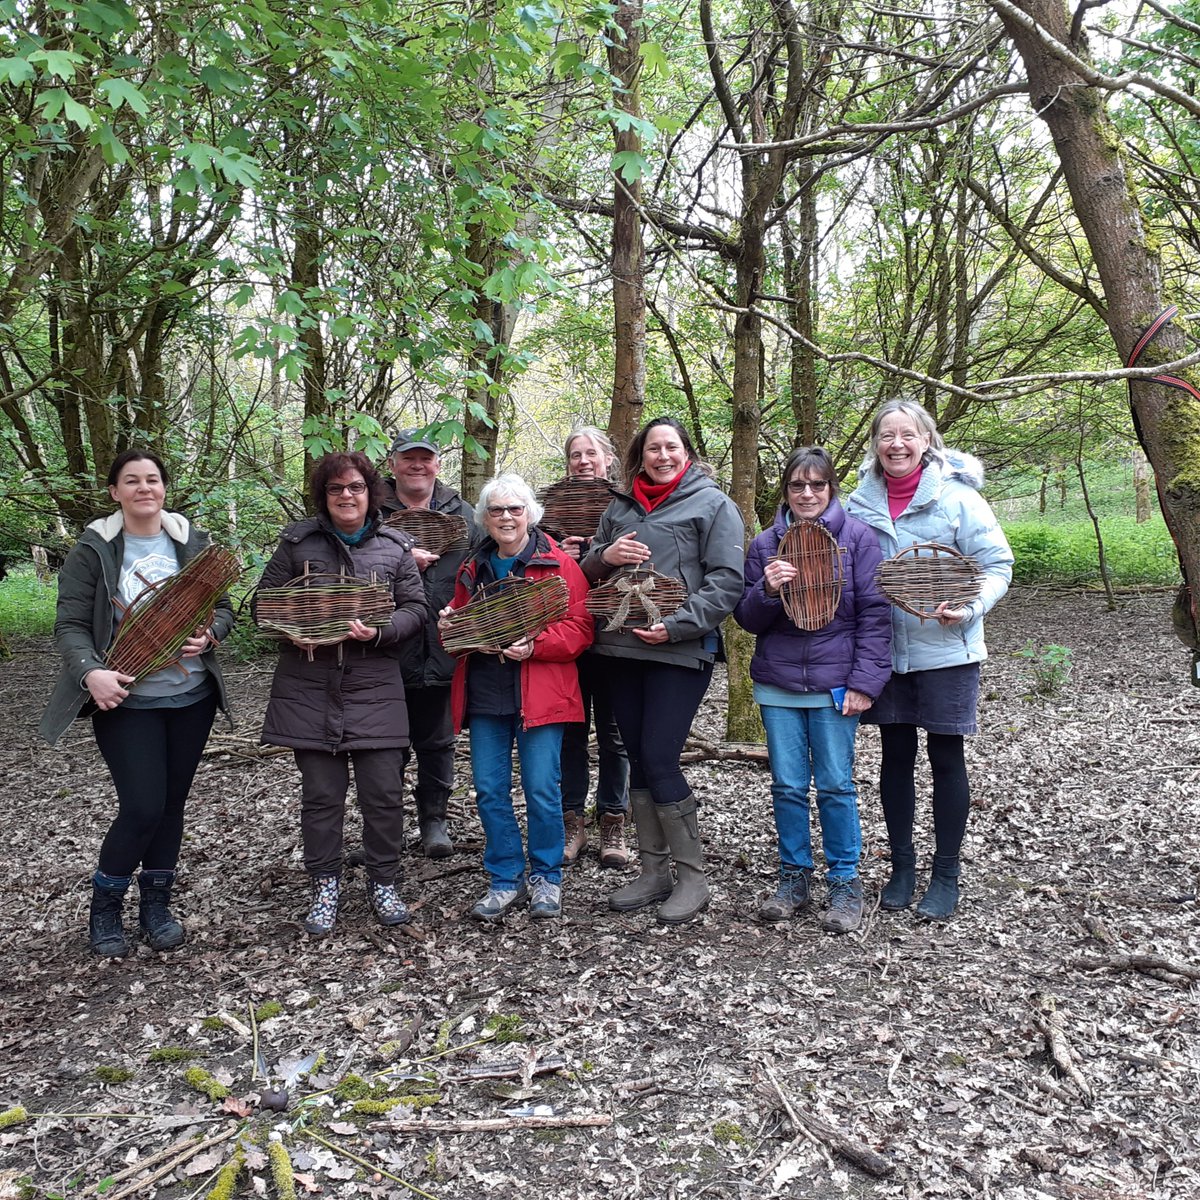 Last week at Kings Farm Wood, participants on the ‘Willow Art and Mindfulness’ session created their very own willow trays to take home. One participant commented “It has been very a relaxing morning and I have learnt a new skill”. Join us on 24 May: ow.ly/JS7P50RquTI